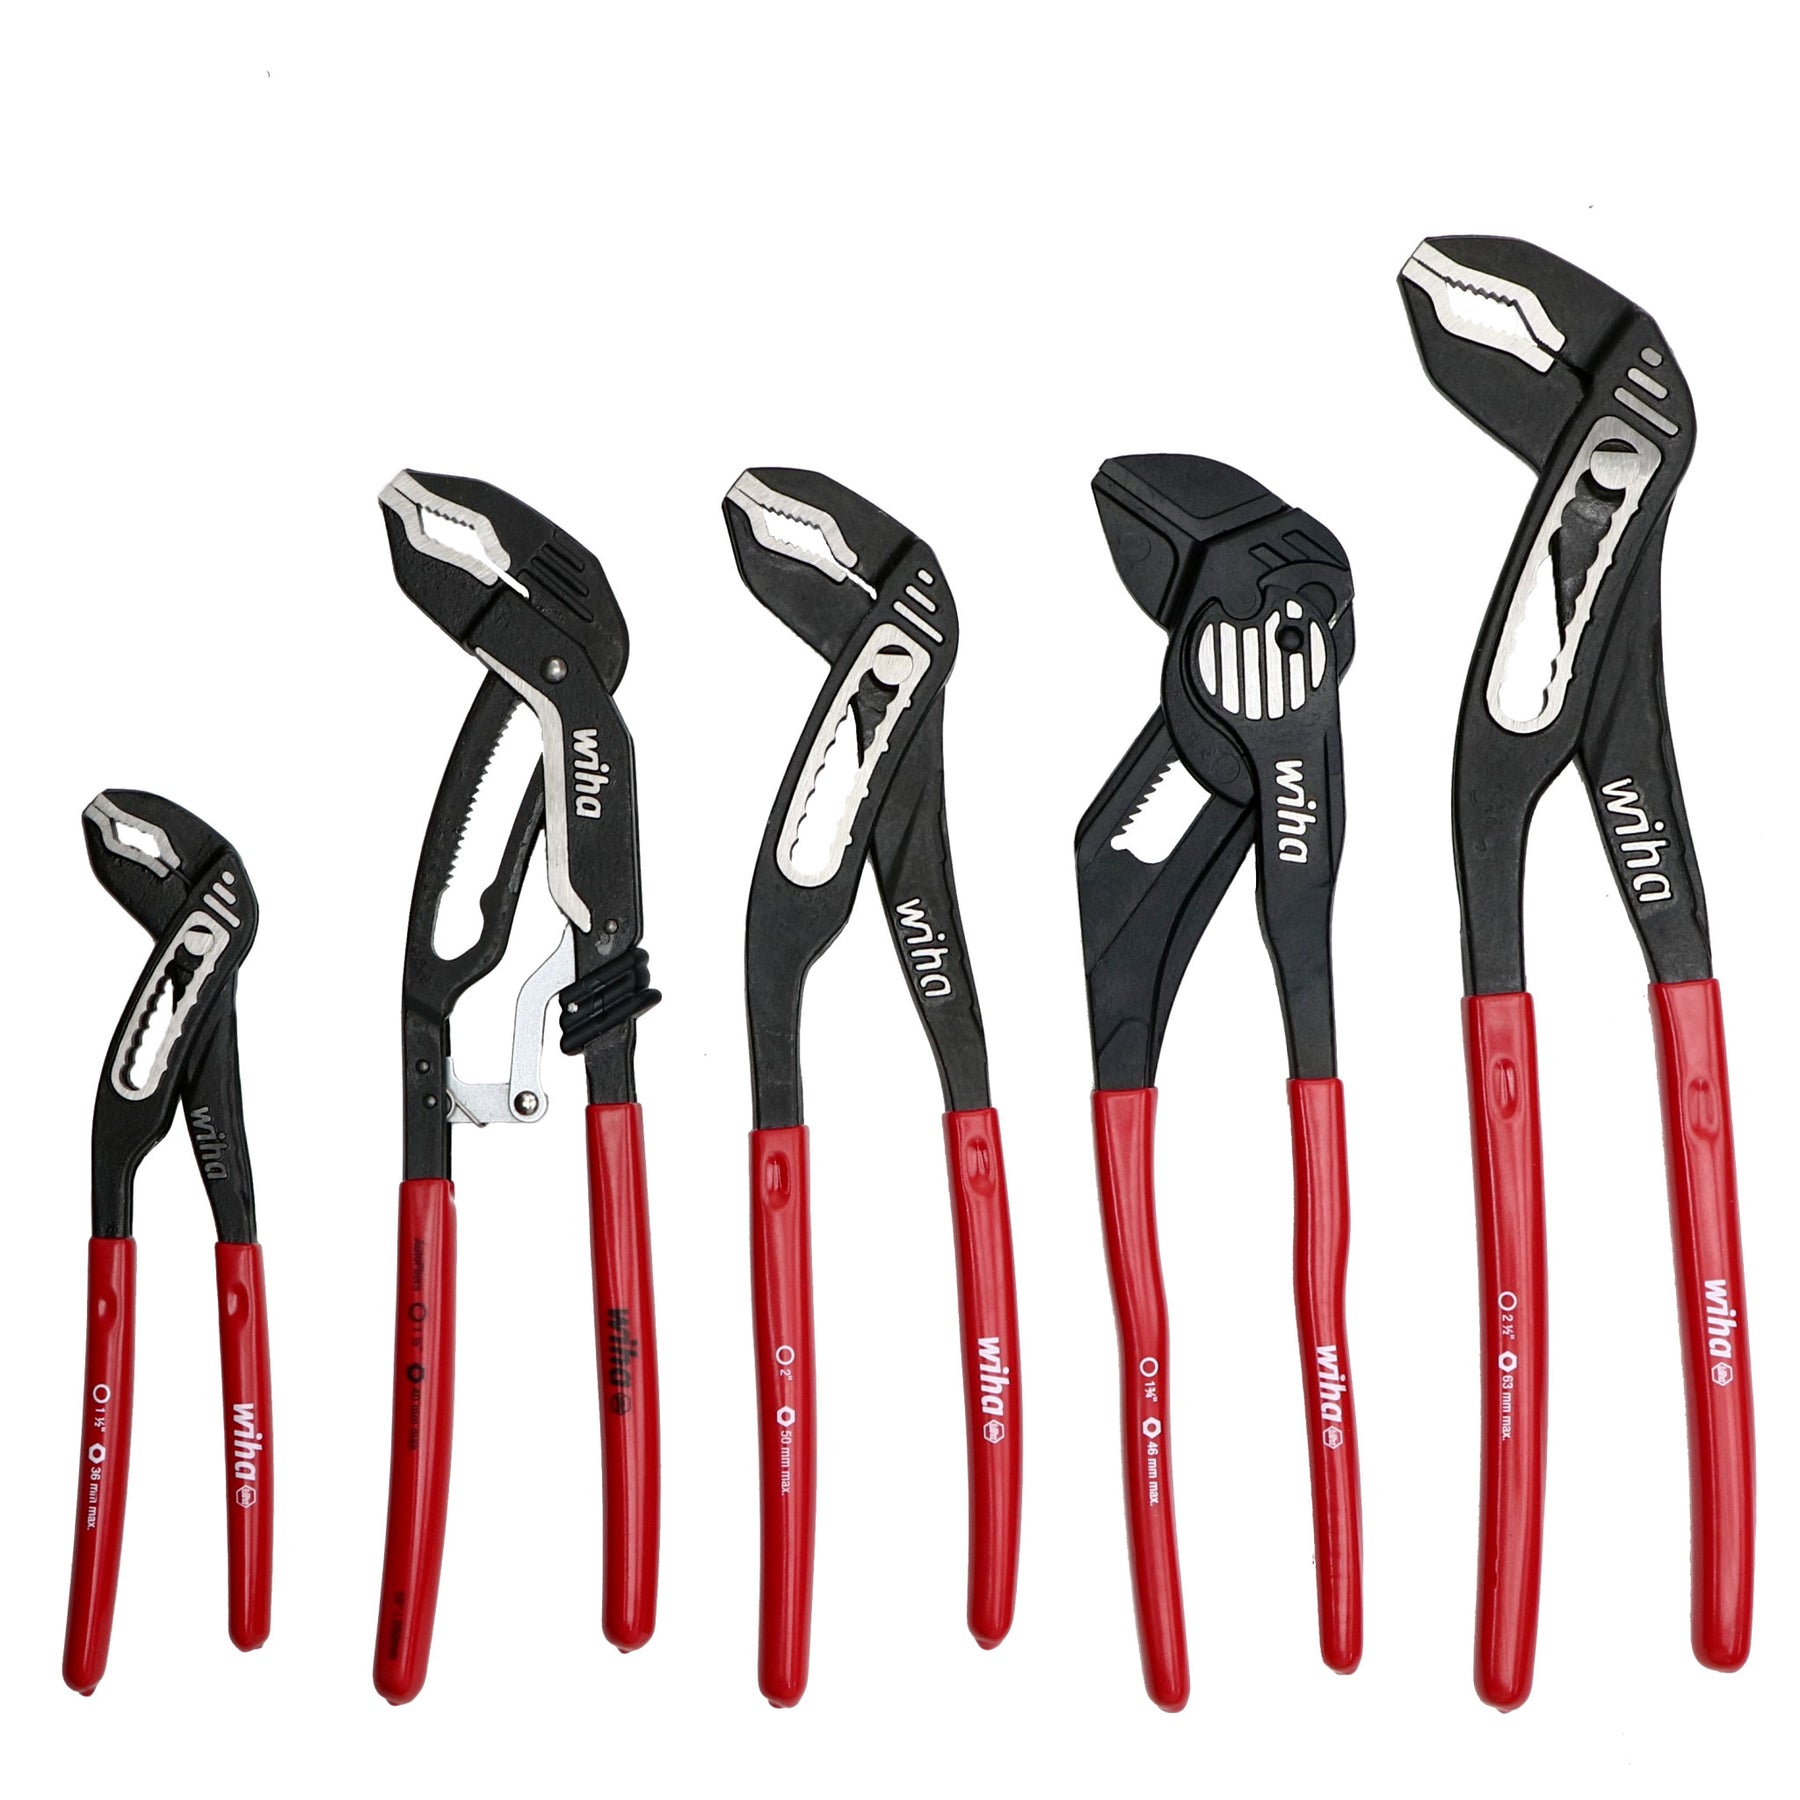 5 Piece Classic Grip V-Jaw Tongue and Groove Pliers Tray Set